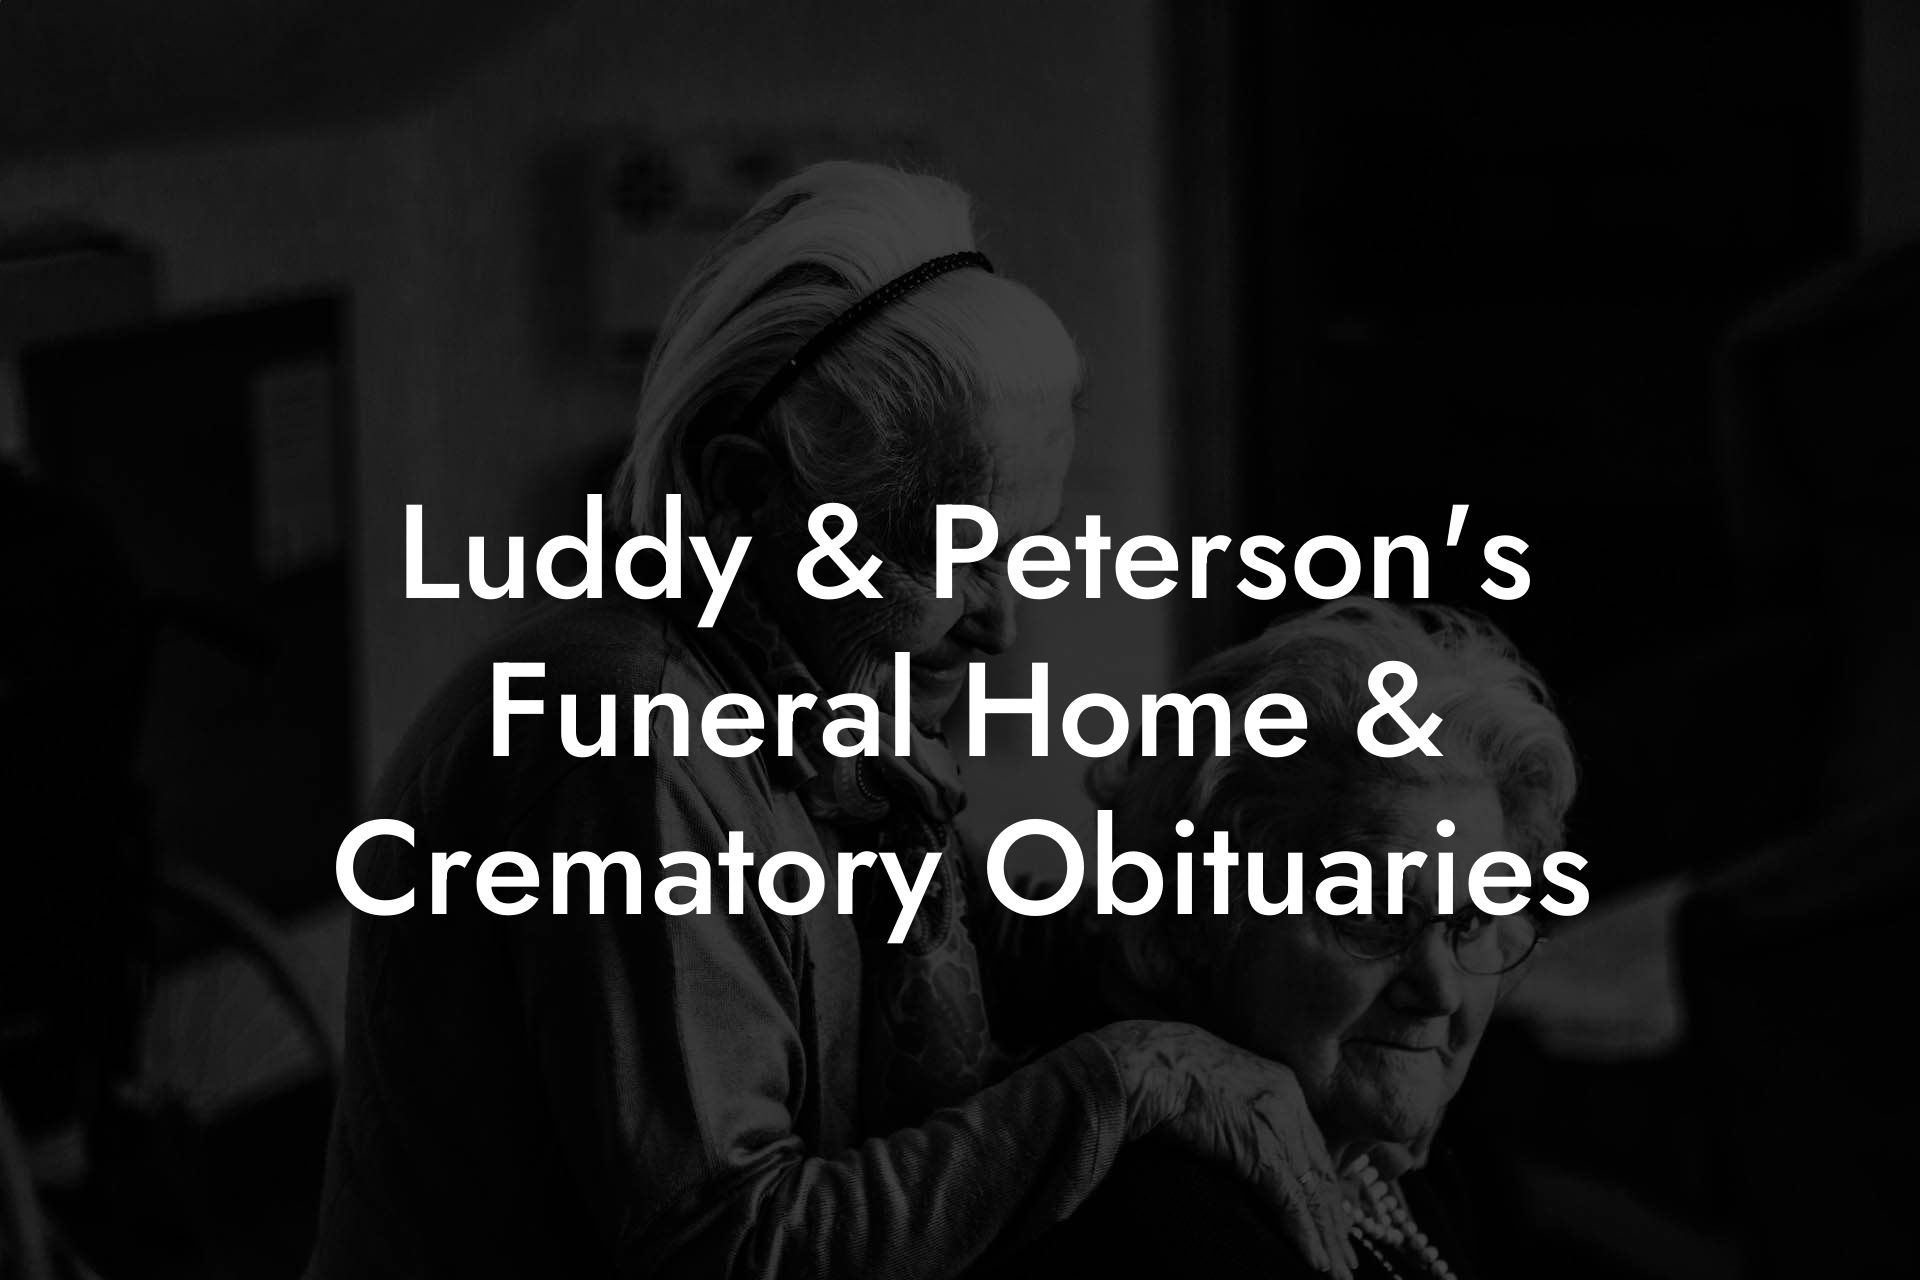 Luddy & Peterson's Funeral Home & Crematory Obituaries